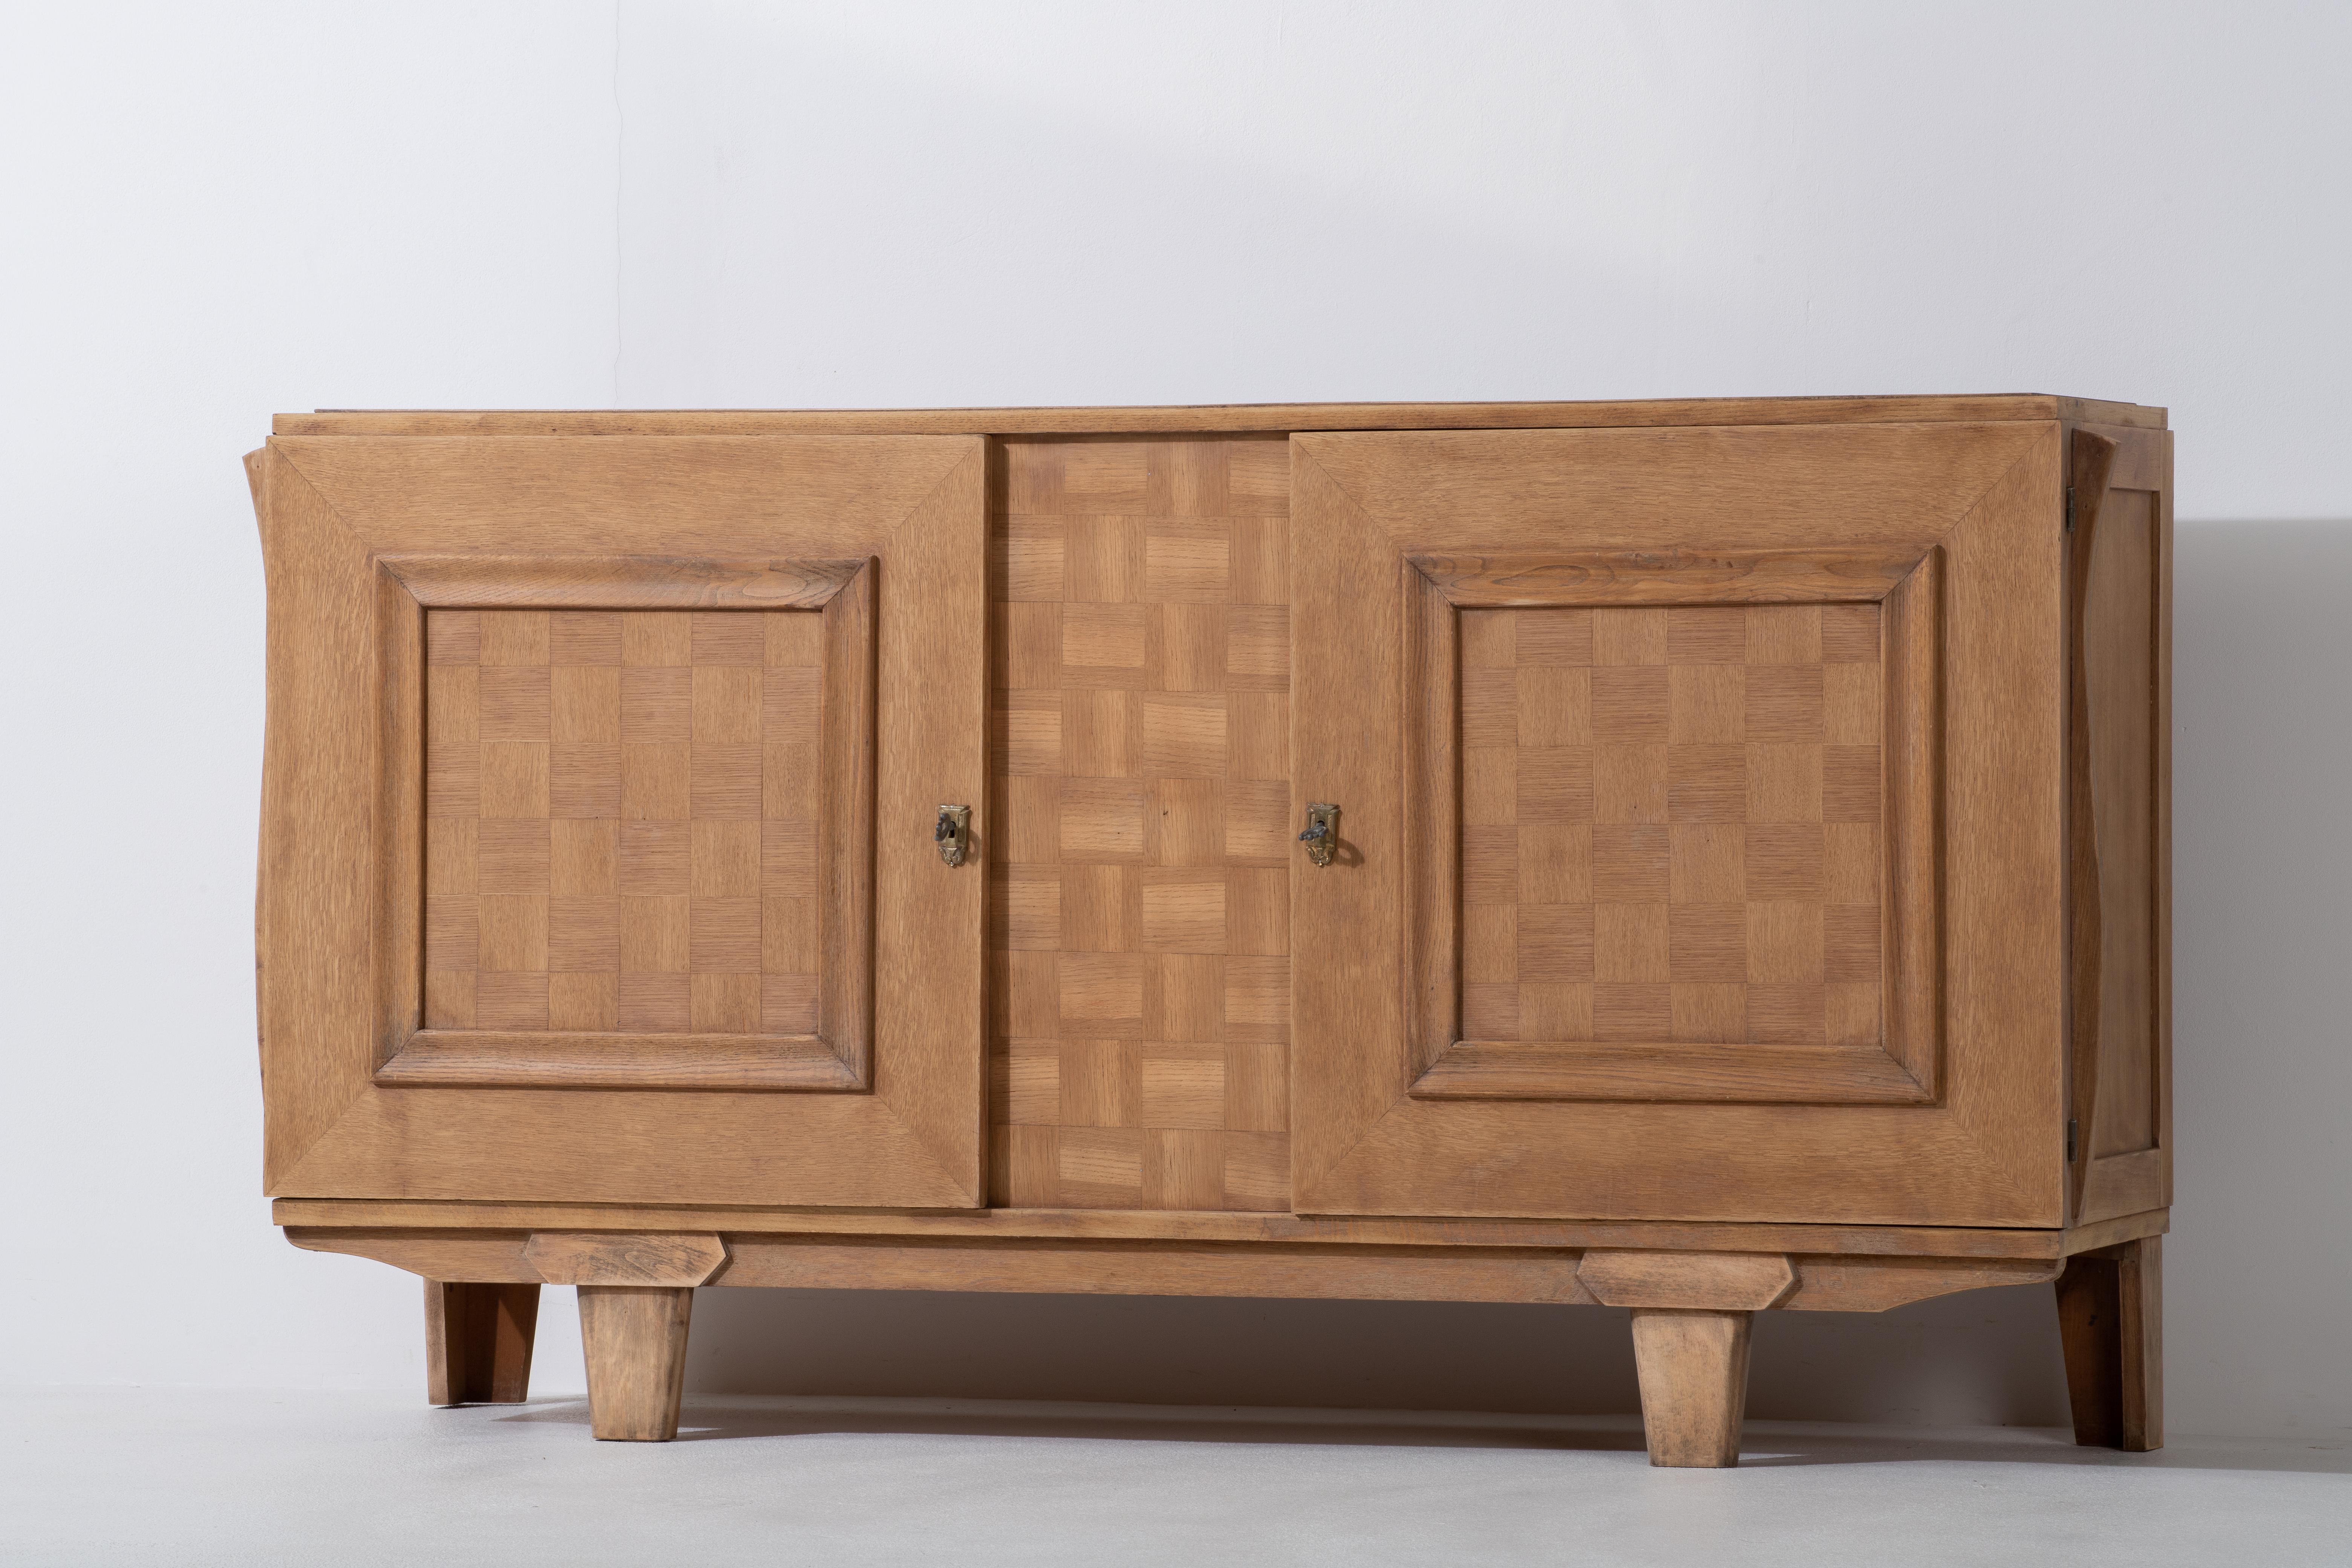 Very elegant credenza in solid oak, France, 1940s.
Large Art Deco Brutalist sideboard. 
The credenza consists of two storage facilities and a central drawer column and covered with very detailed designed doors. 
Very elegant.
The refined wooden